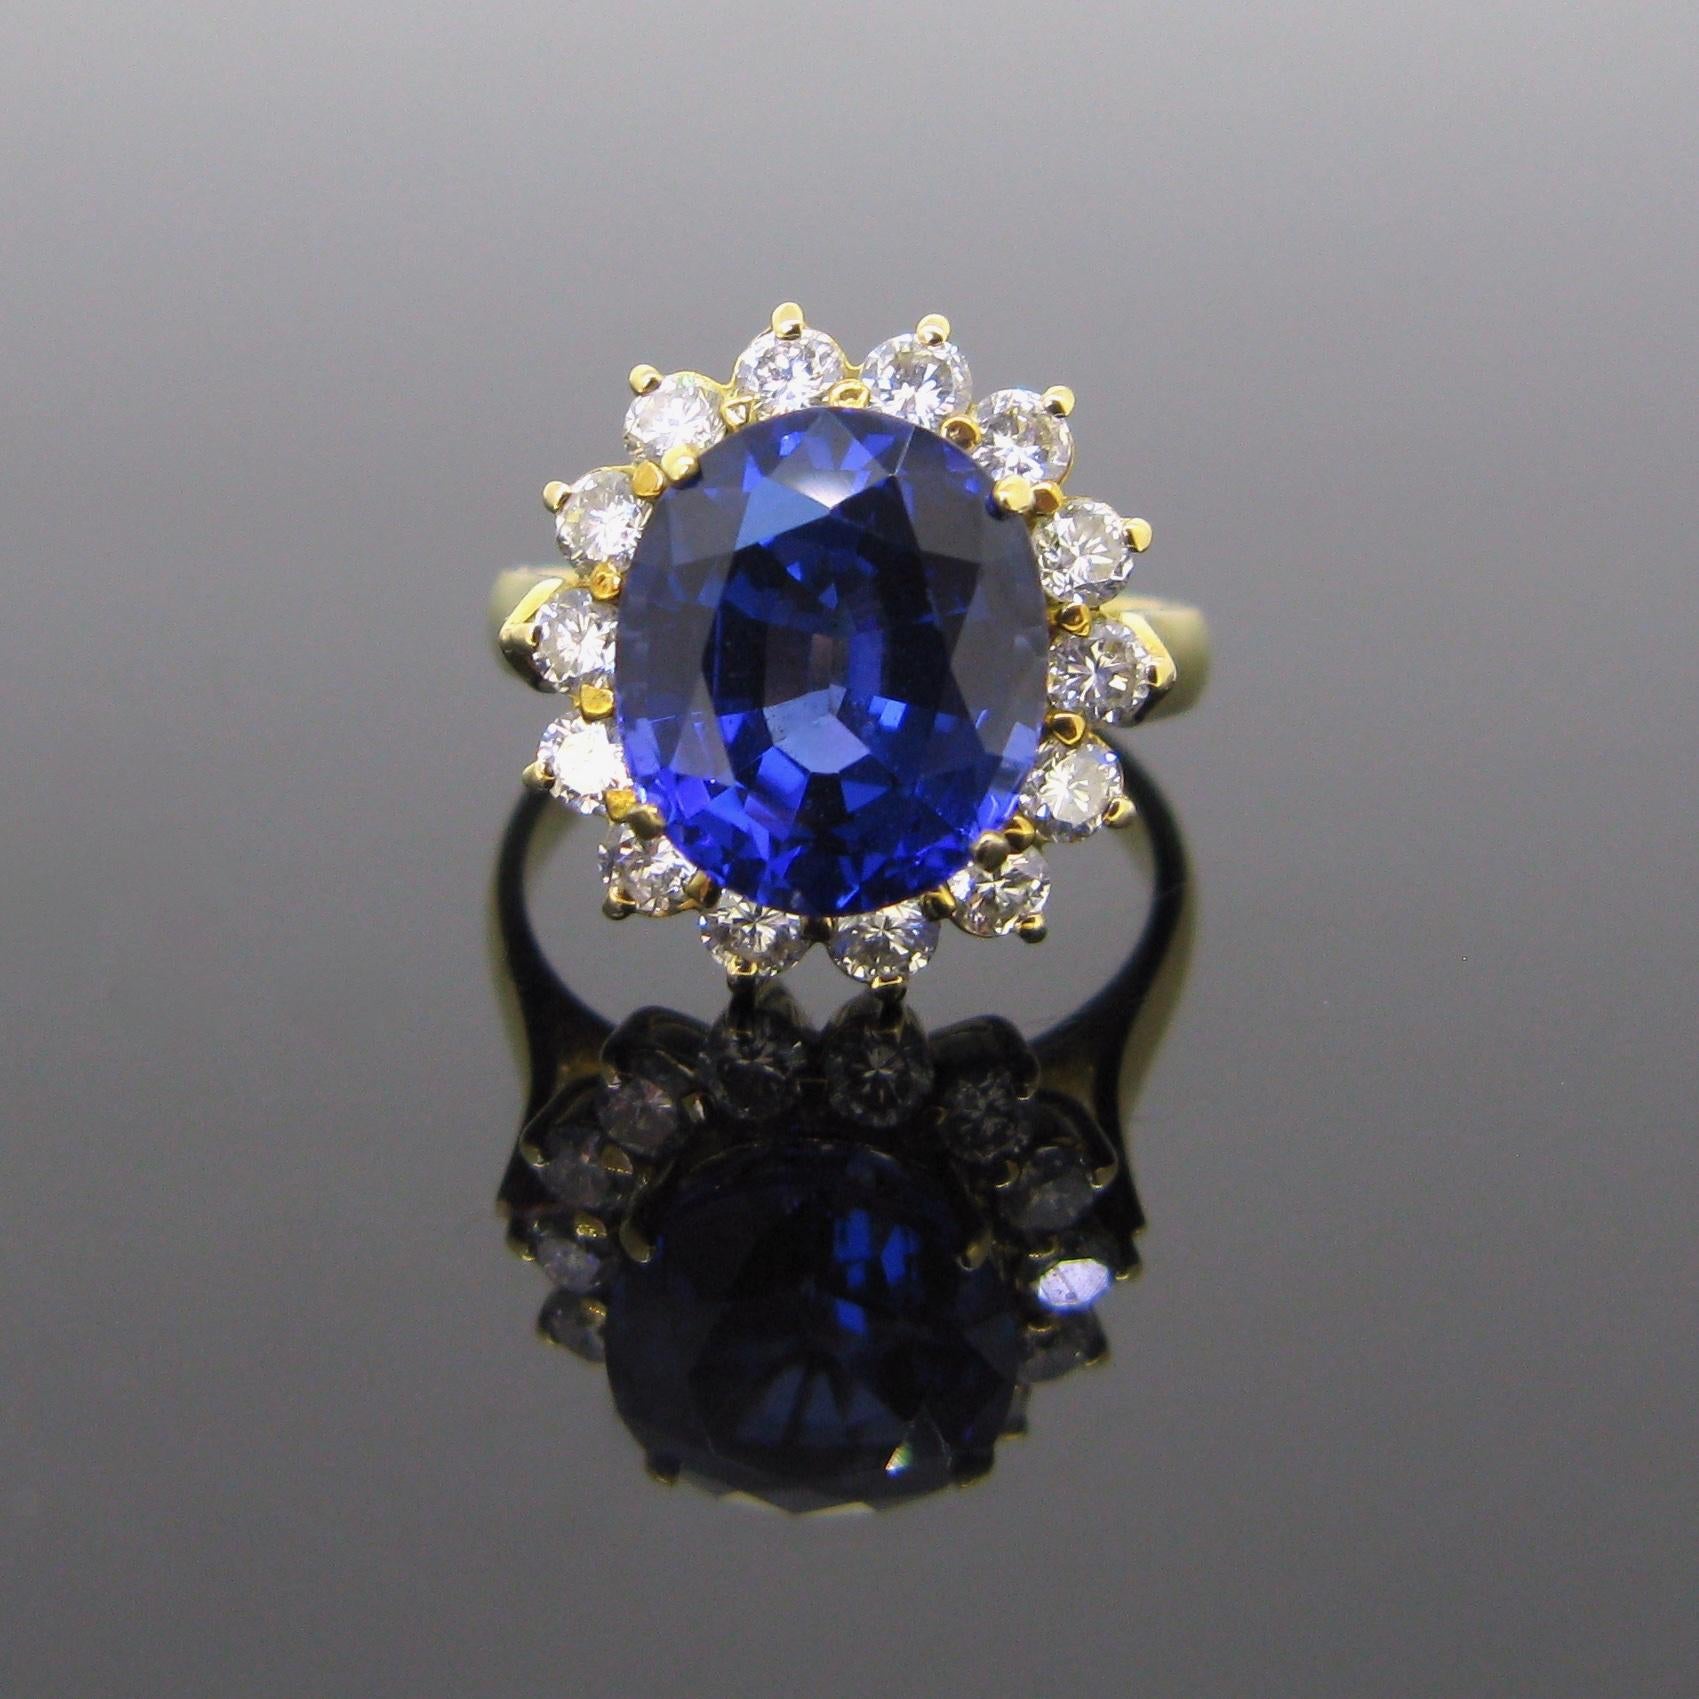 This ring is set in its center with a nice deep bluish purple tanzanite of 5,30ct approximately. It is surrounded with 14 brilliant cut diamonds. There is an approximate carat weight of 1,20ct (H/VS).  It is a size 51 - 5 1/4- K 1/4 and could be